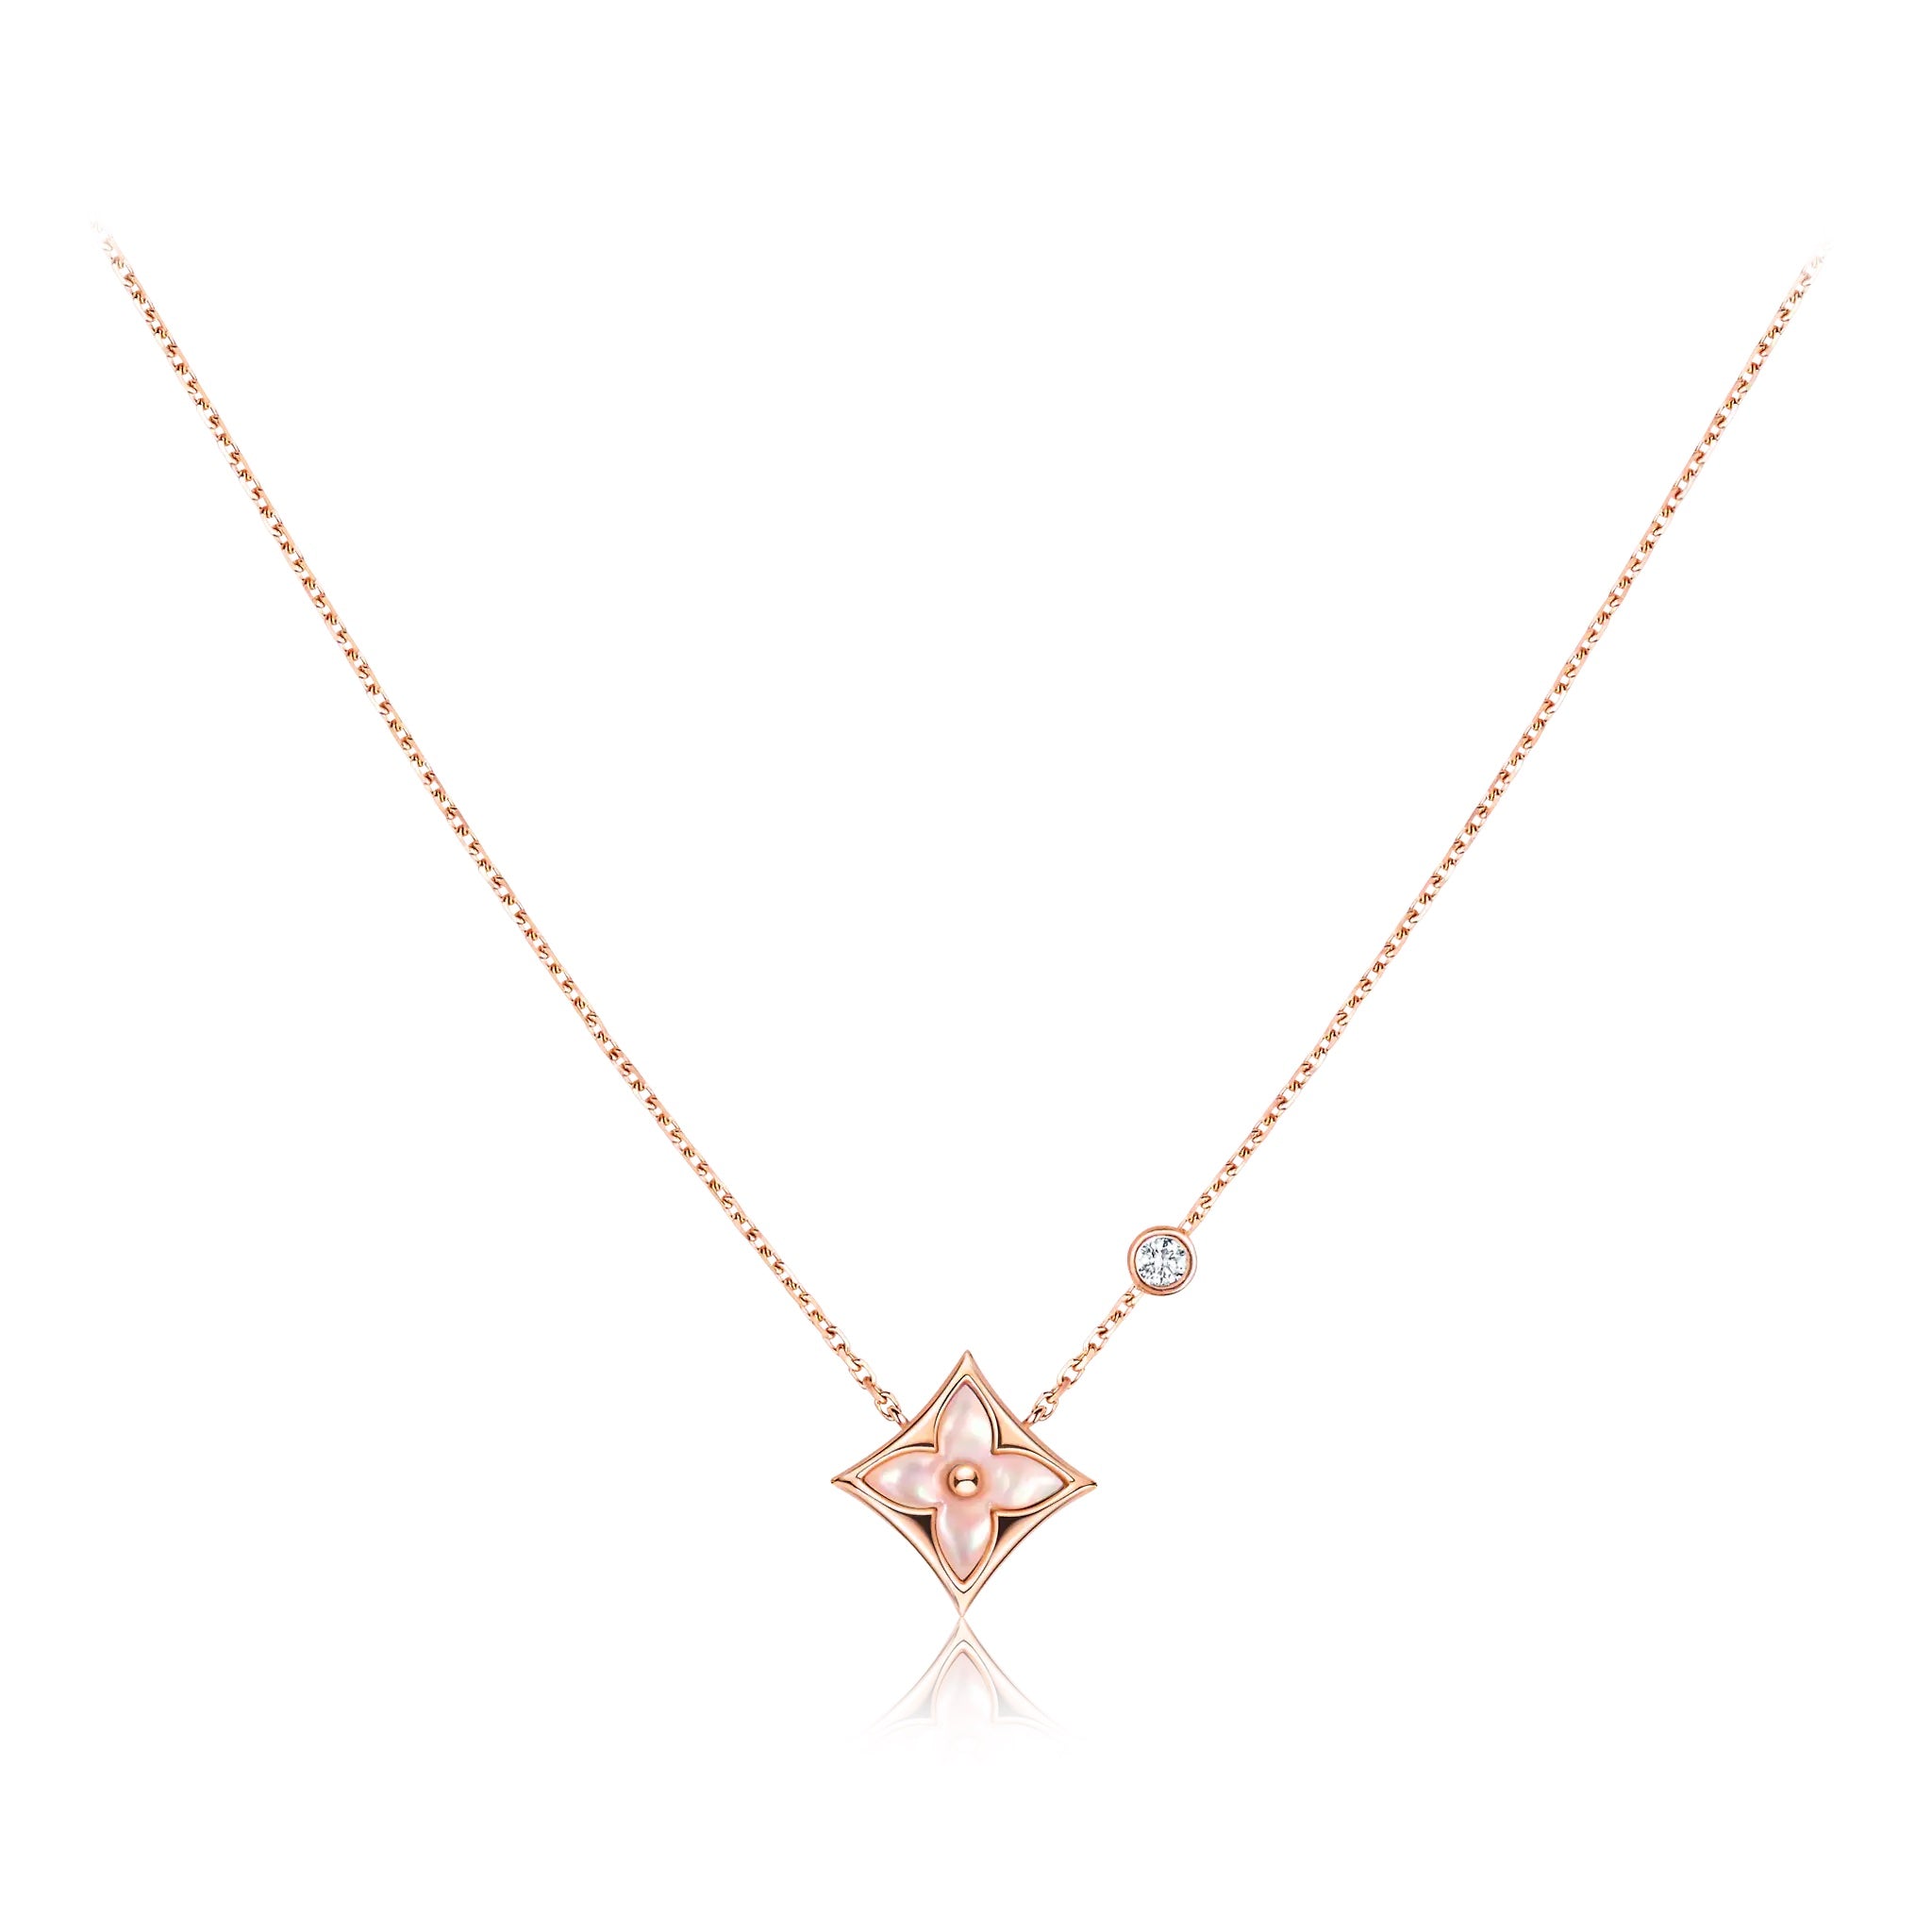 LOUIS VUITTON COLOR BLOSSOM BB STAR PENDANT PINK GOLD PINK MOTHER-OF-PEARL  & DIAMOND NECKLACE